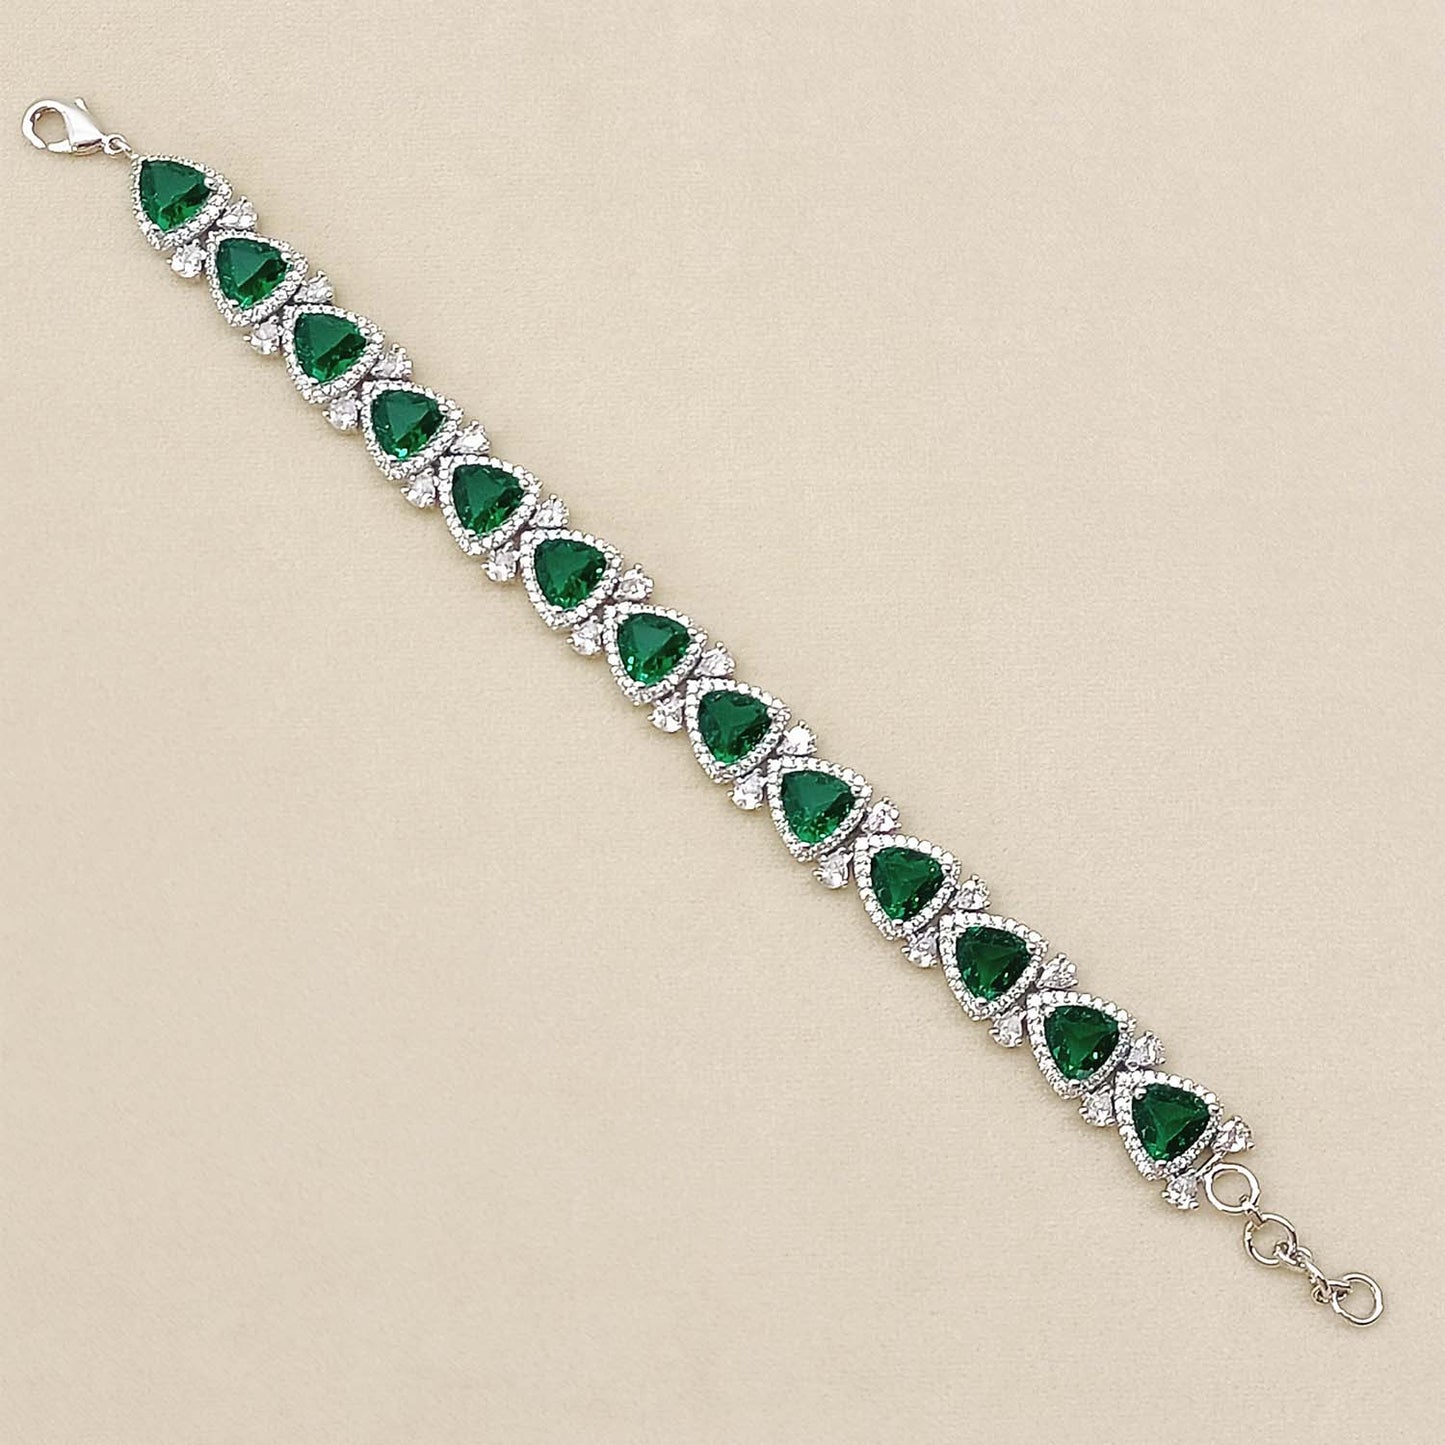 Vasanti Green Stoned And Silver Plated American Daimond Flexible Braclet